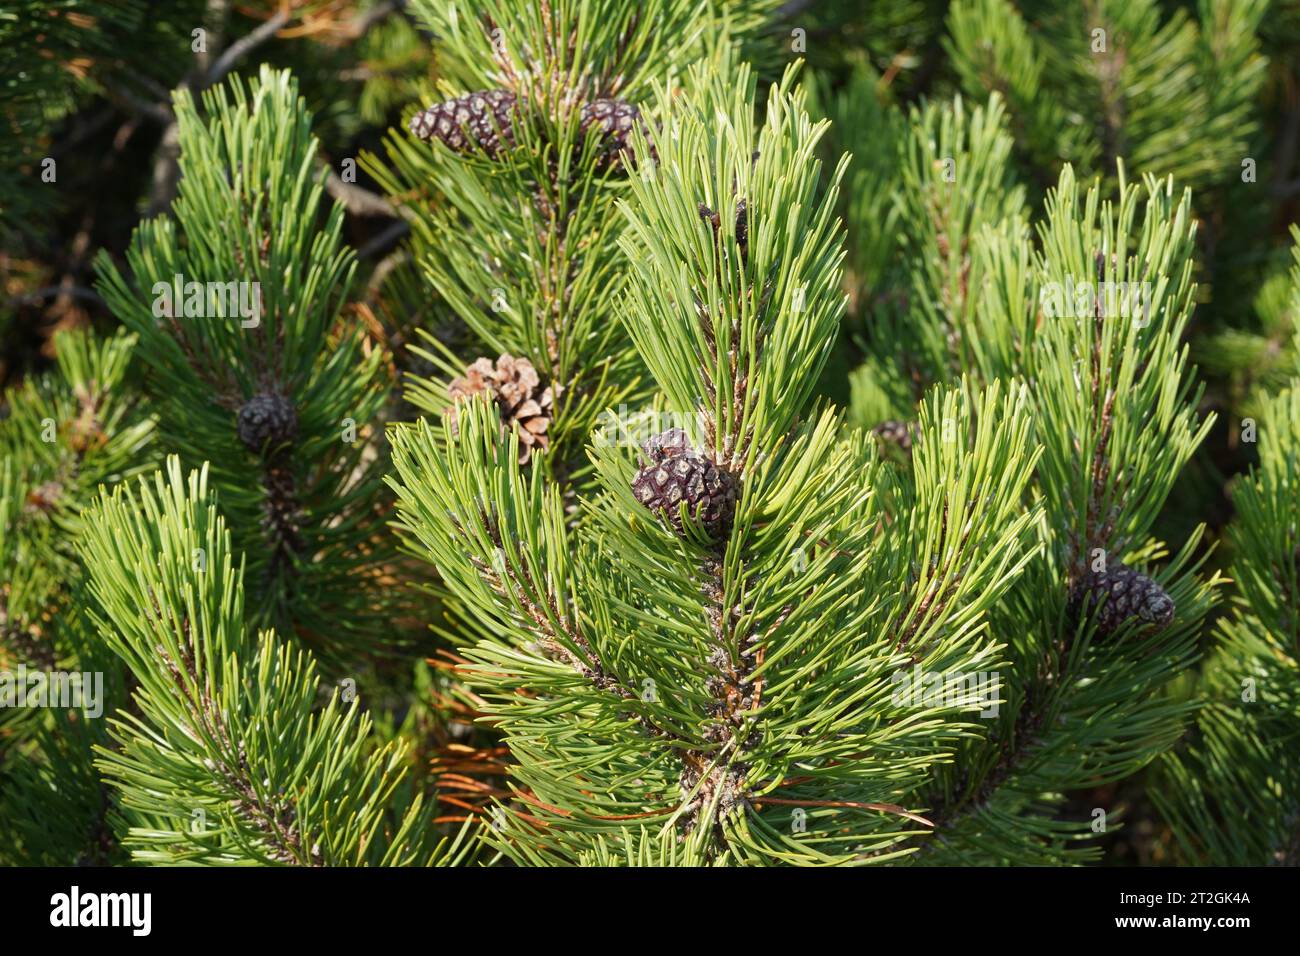 Pine tree branch  close up with fresh green needles and a small pinecone. Stock Photo